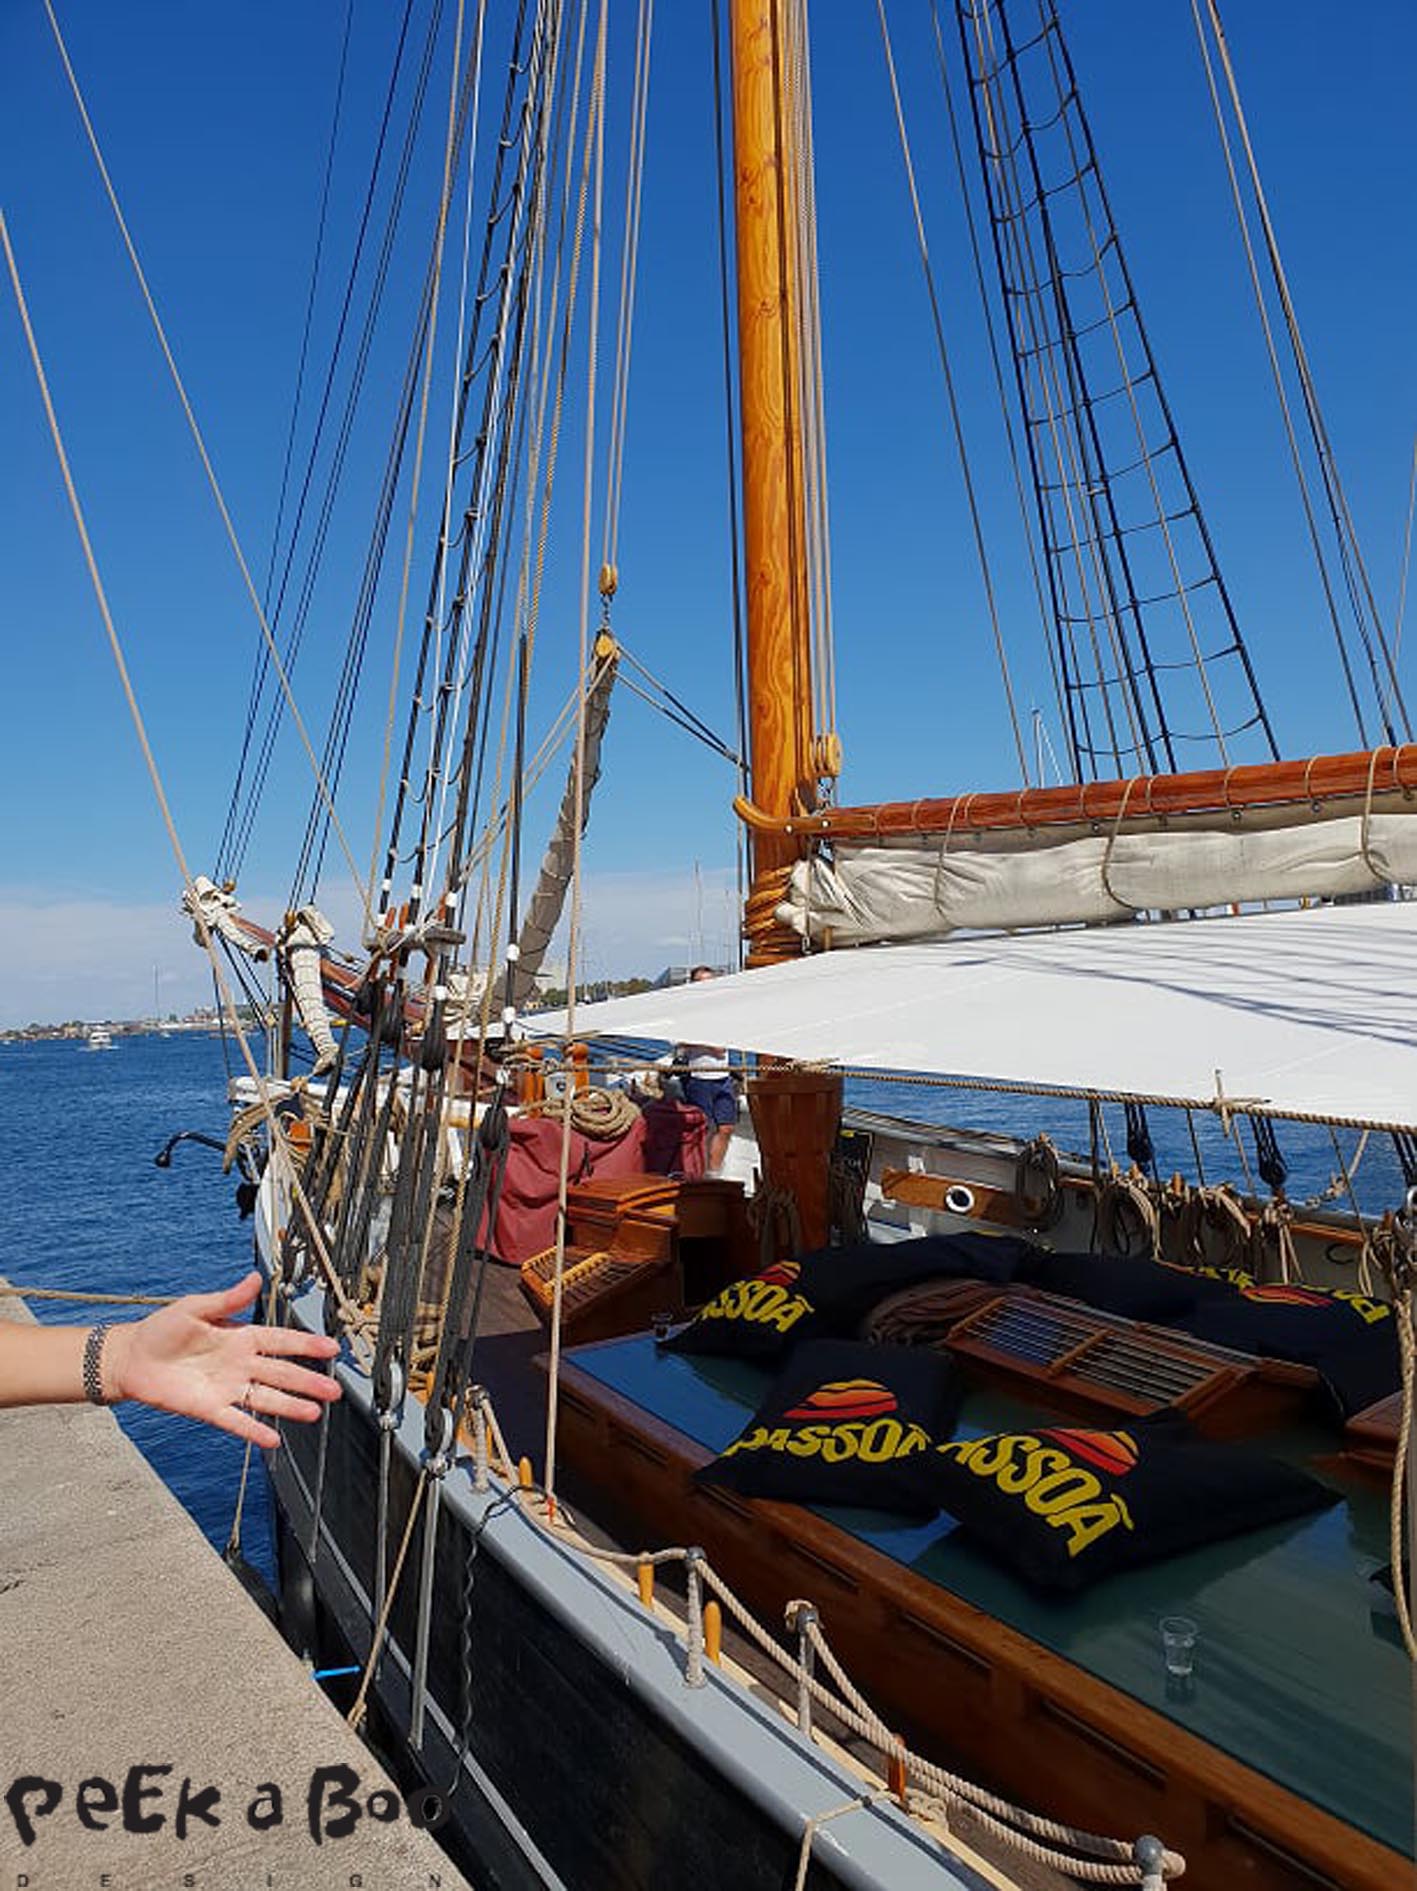 The boat was built in 1900 and fantastic venue for this event. Sailing and drinks on a hot summer day is really the best combination. 